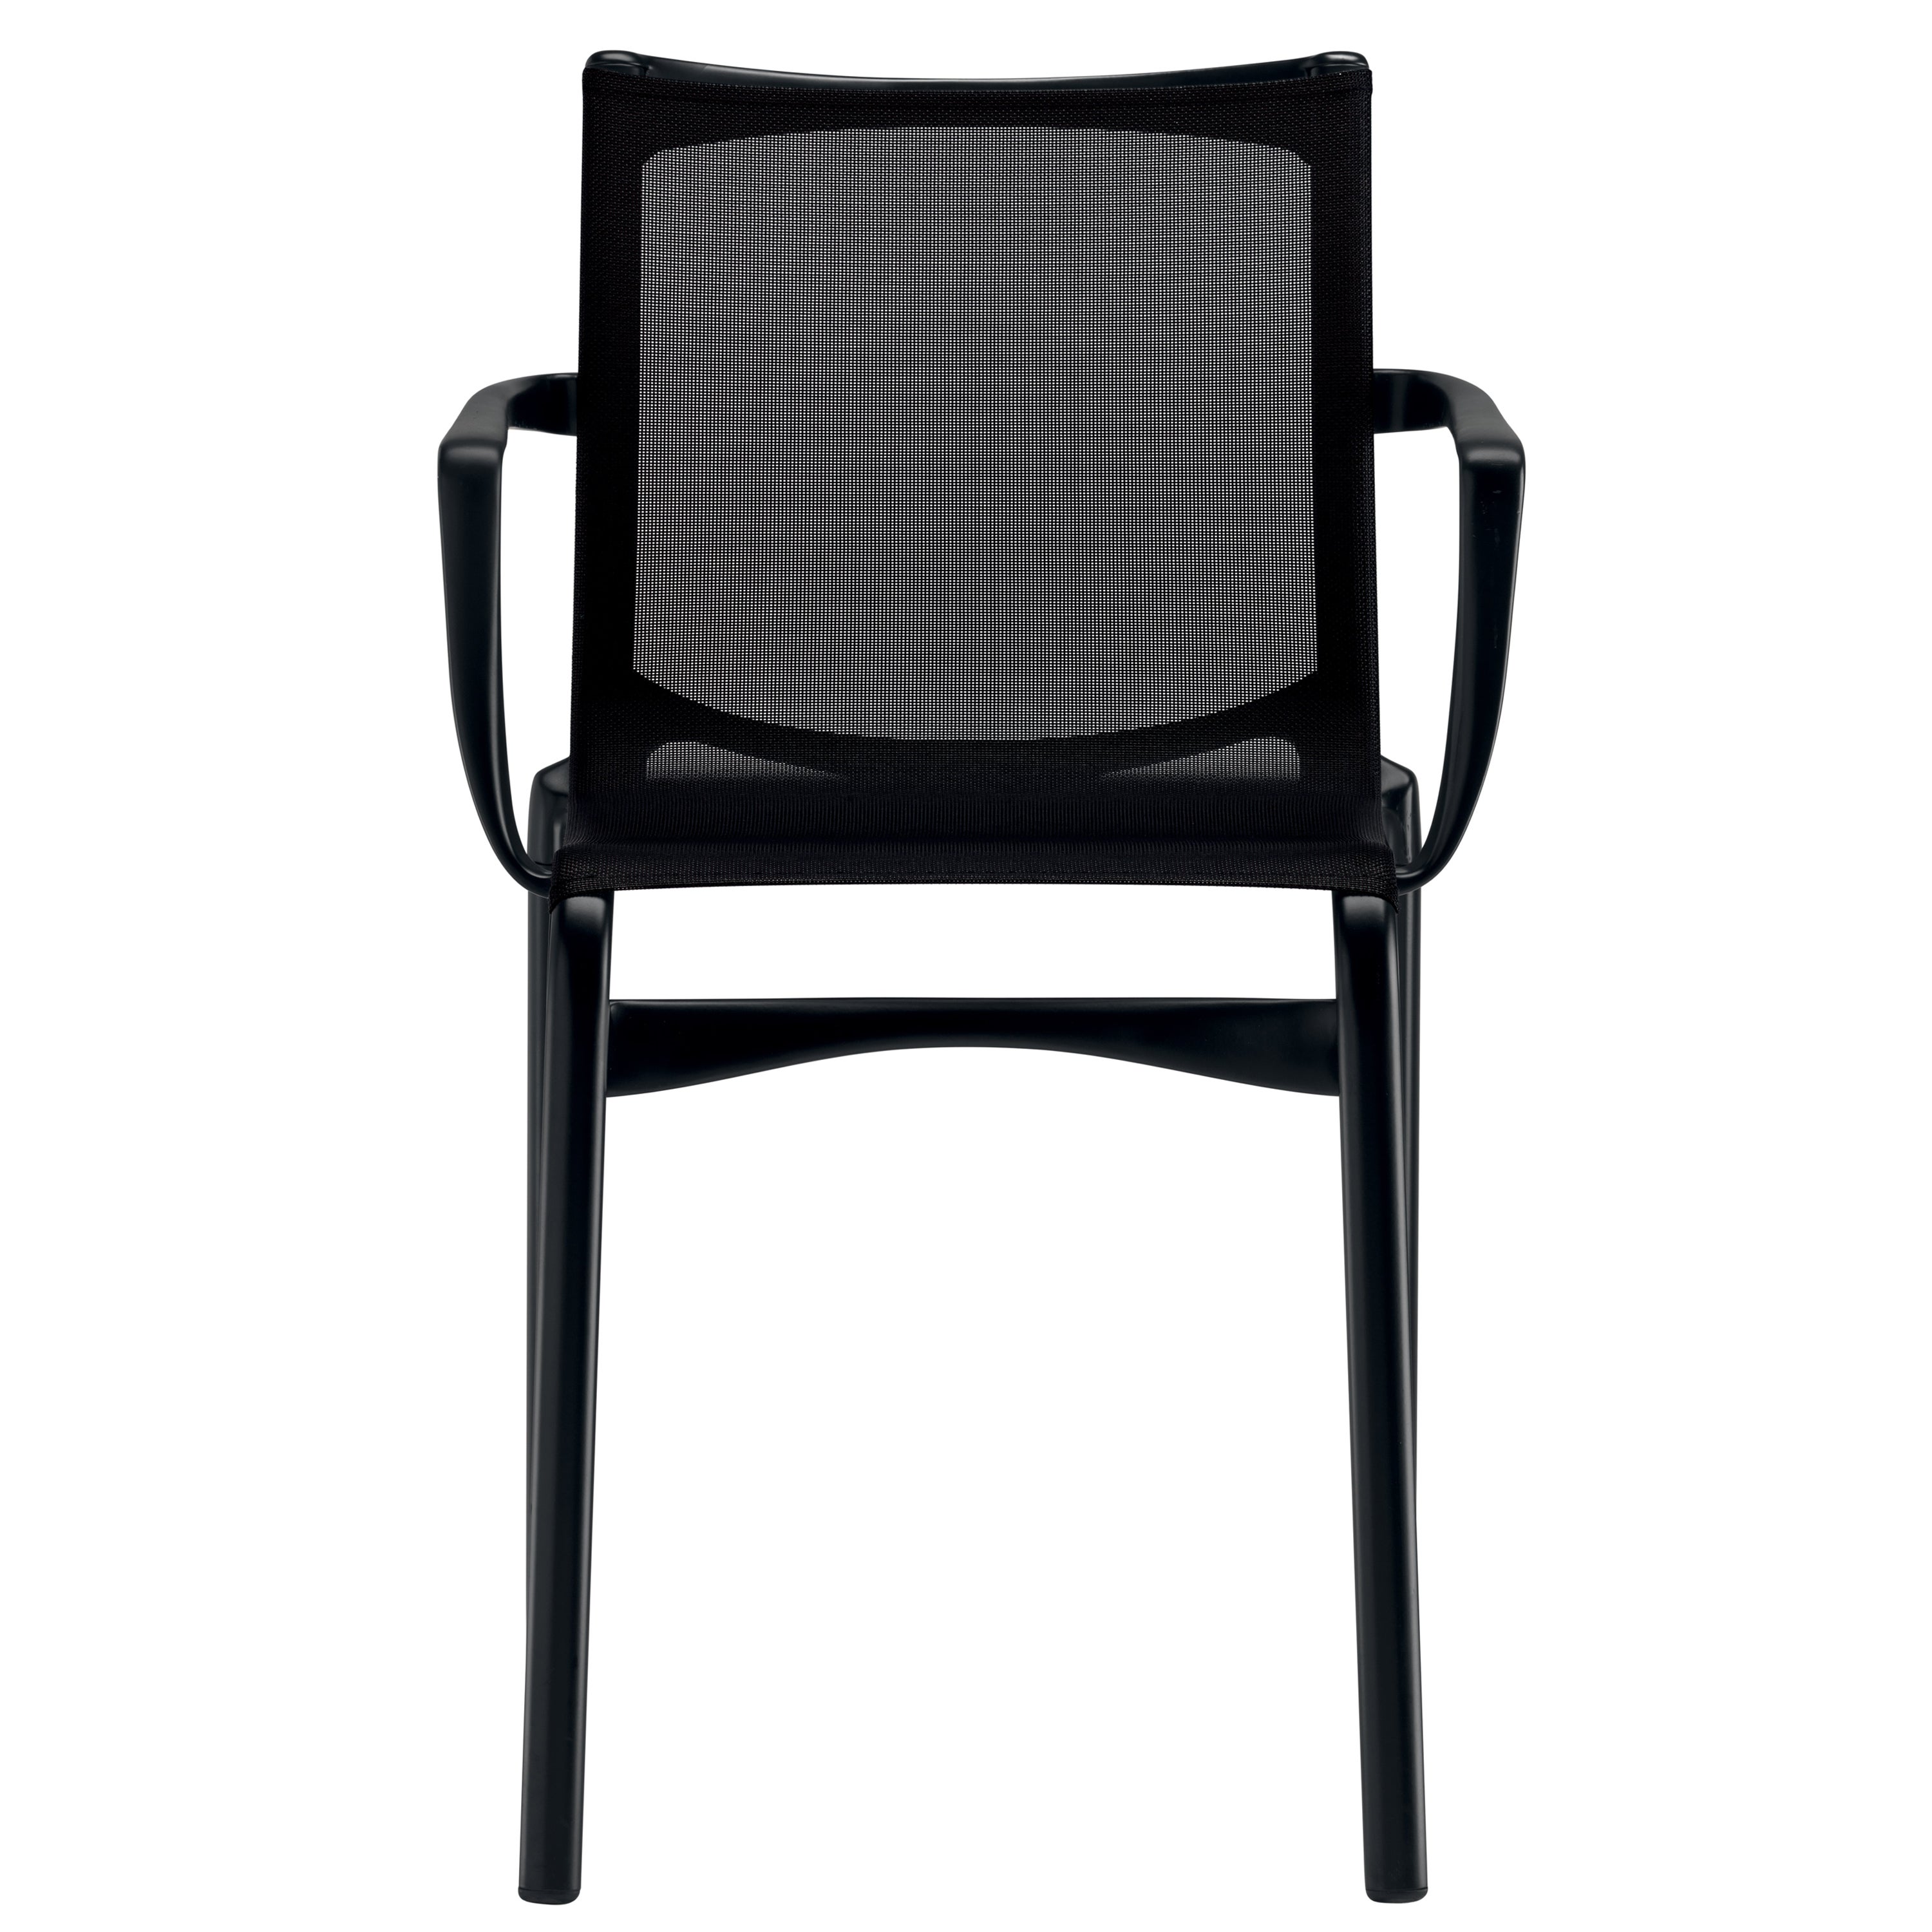 Alias 417 Highframe Chair in Black Mesh with Black Lacquered Aluminium Frame